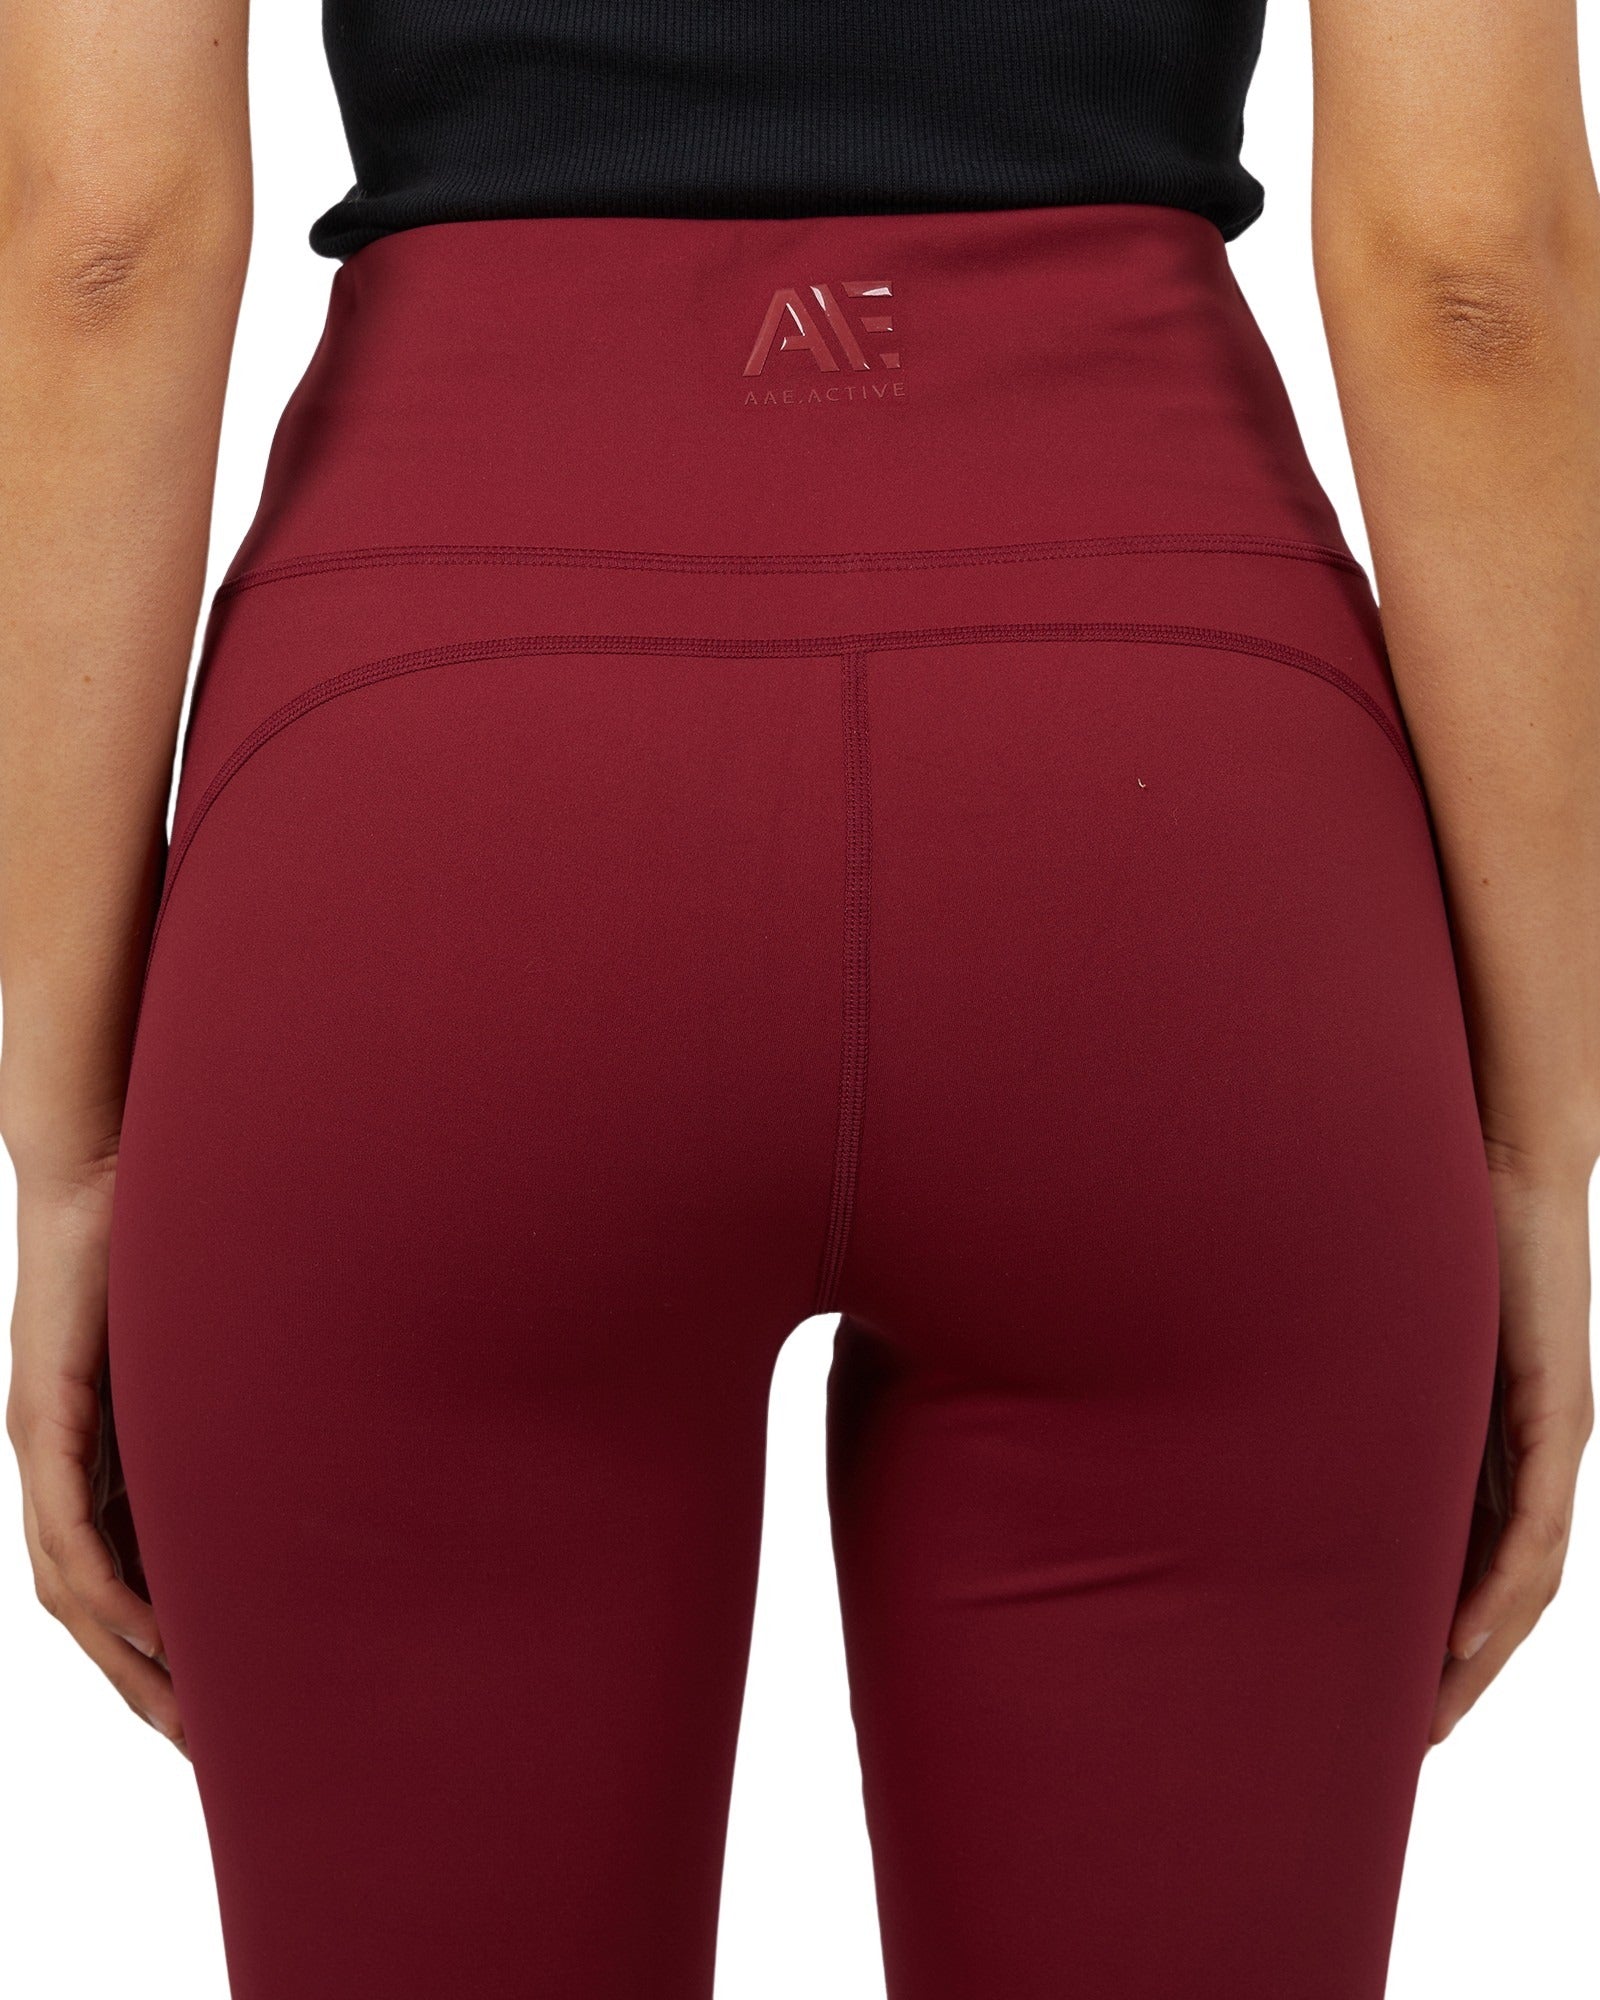 All About Eve - AAE Active Flare Legging - Port